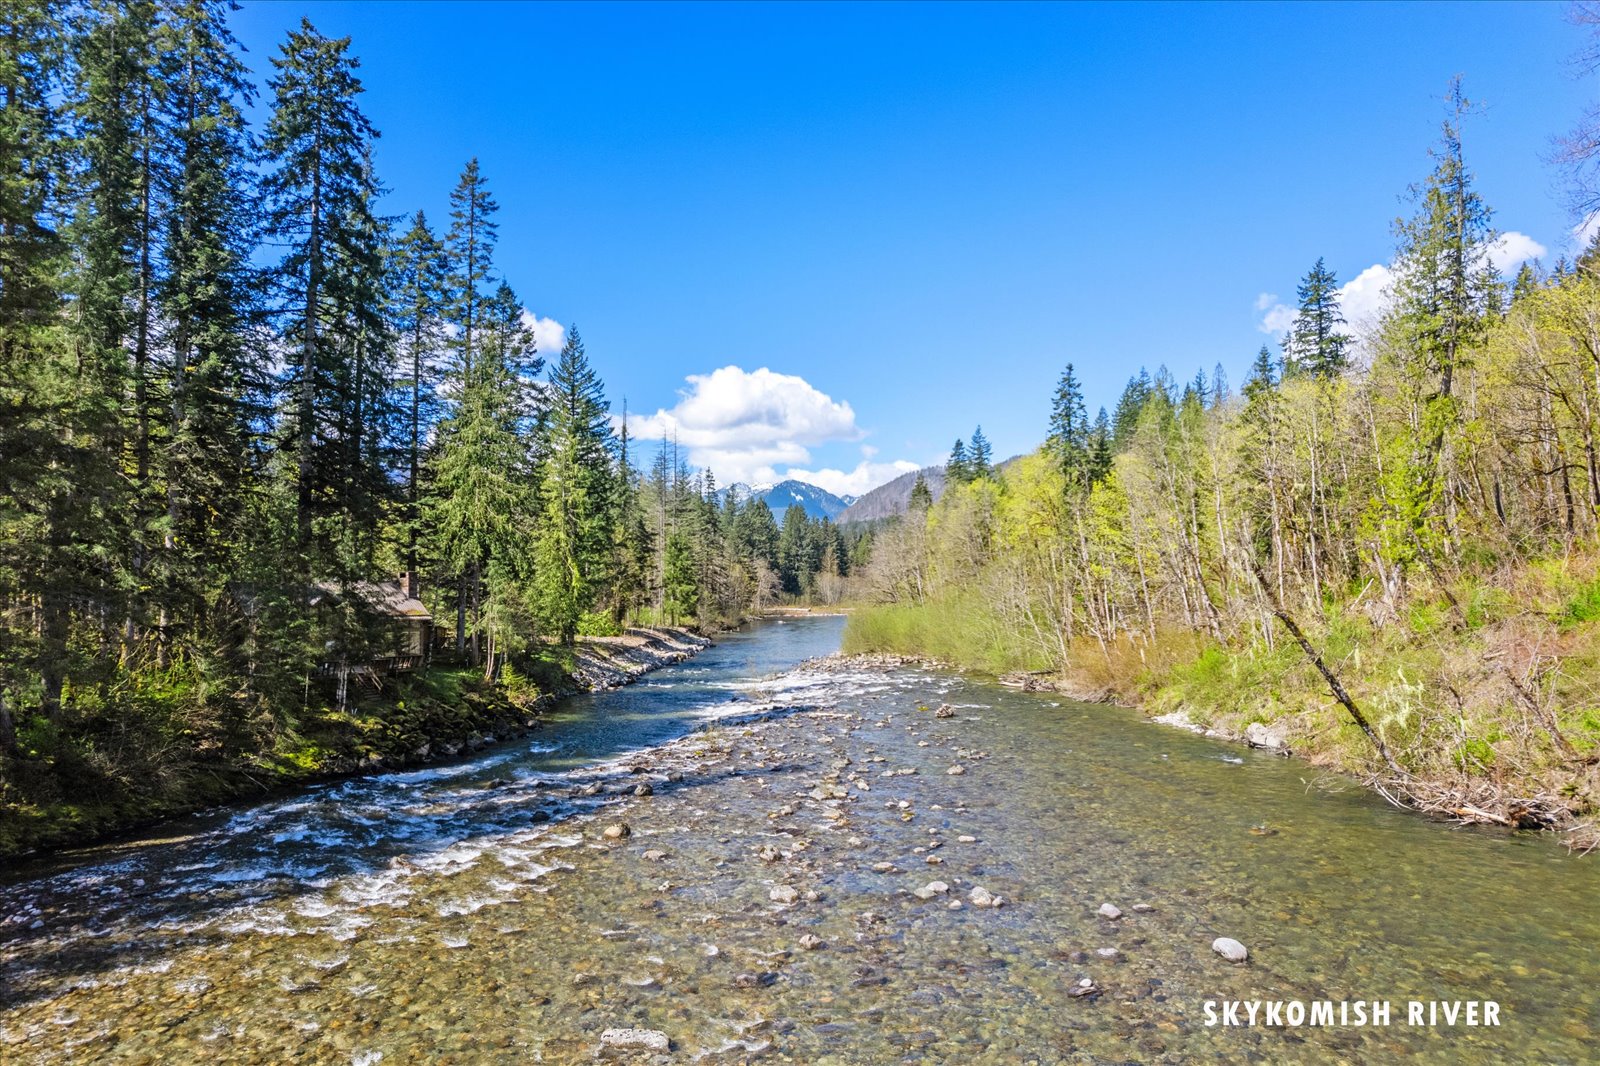 The Skykomish River in the Cascade Mountains